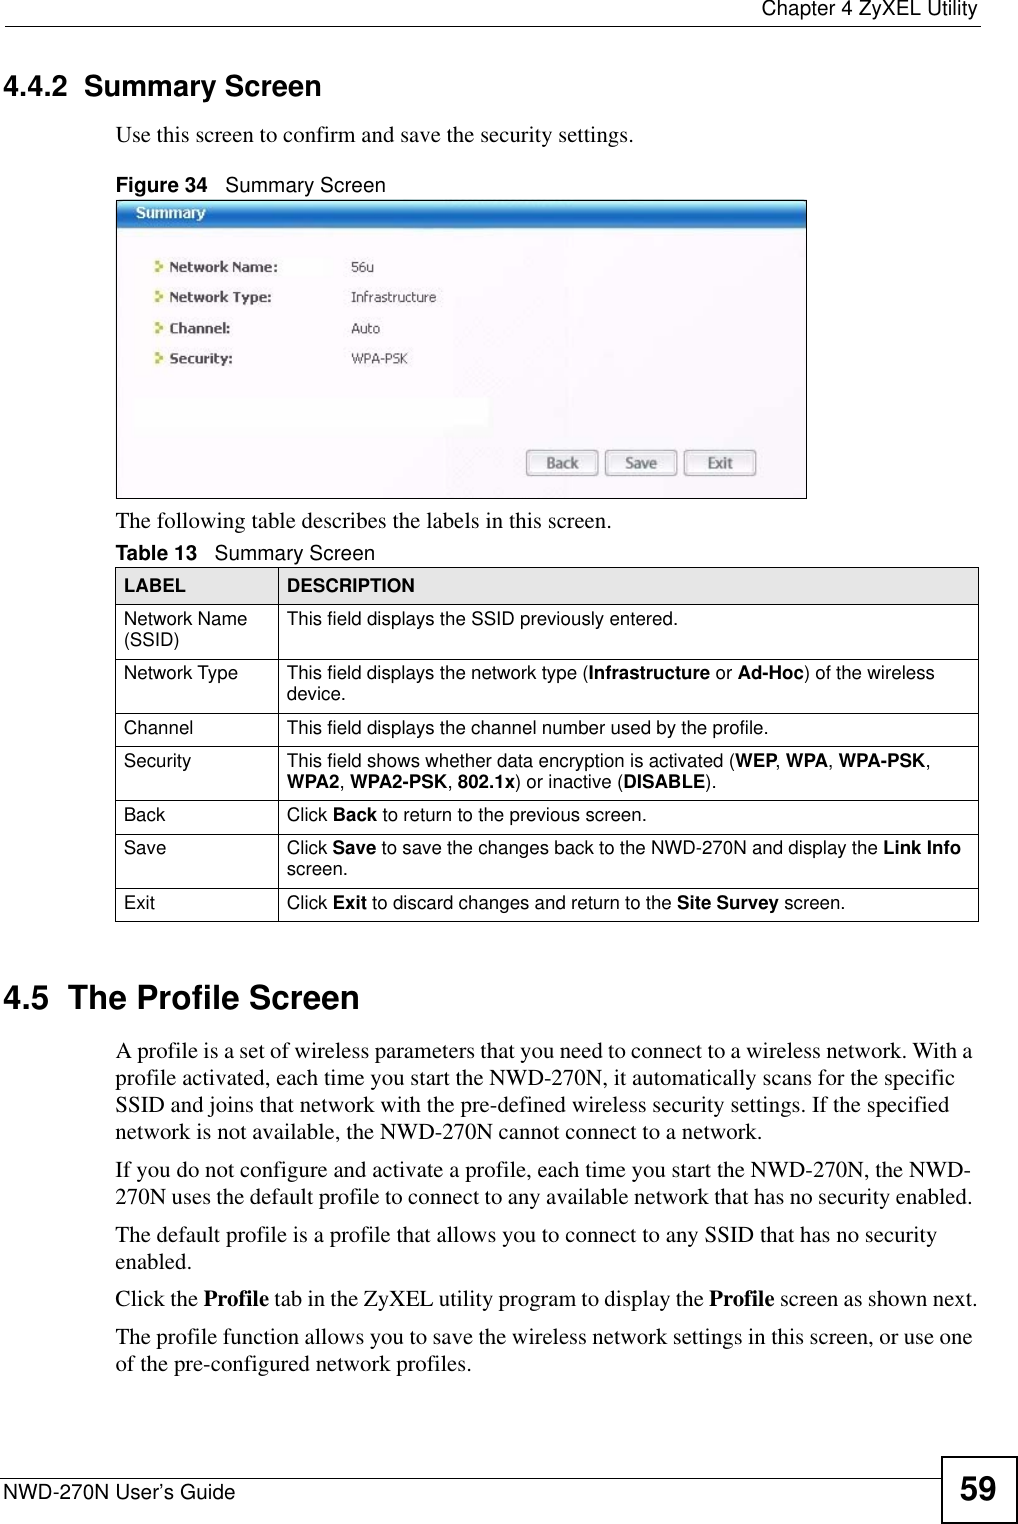  Chapter 4 ZyXEL UtilityNWD-270N User’s Guide 594.4.2  Summary ScreenUse this screen to confirm and save the security settings. Figure 34   Summary Screen The following table describes the labels in this screen.  4.5  The Profile Screen A profile is a set of wireless parameters that you need to connect to a wireless network. With a profile activated, each time you start the NWD-270N, it automatically scans for the specific SSID and joins that network with the pre-defined wireless security settings. If the specified network is not available, the NWD-270N cannot connect to a network.If you do not configure and activate a profile, each time you start the NWD-270N, the NWD-270N uses the default profile to connect to any available network that has no security enabled. The default profile is a profile that allows you to connect to any SSID that has no security enabled. Click the Profile tab in the ZyXEL utility program to display the Profile screen as shown next.The profile function allows you to save the wireless network settings in this screen, or use one of the pre-configured network profiles.Table 13   Summary ScreenLABEL DESCRIPTIONNetwork Name (SSID) This field displays the SSID previously entered.Network Type This field displays the network type (Infrastructure or Ad-Hoc) of the wireless device.Channel This field displays the channel number used by the profile.Security This field shows whether data encryption is activated (WEP, WPA, WPA-PSK, WPA2, WPA2-PSK, 802.1x) or inactive (DISABLE).Back Click Back to return to the previous screen.Save Click Save to save the changes back to the NWD-270N and display the Link Info screen. Exit Click Exit to discard changes and return to the Site Survey screen.